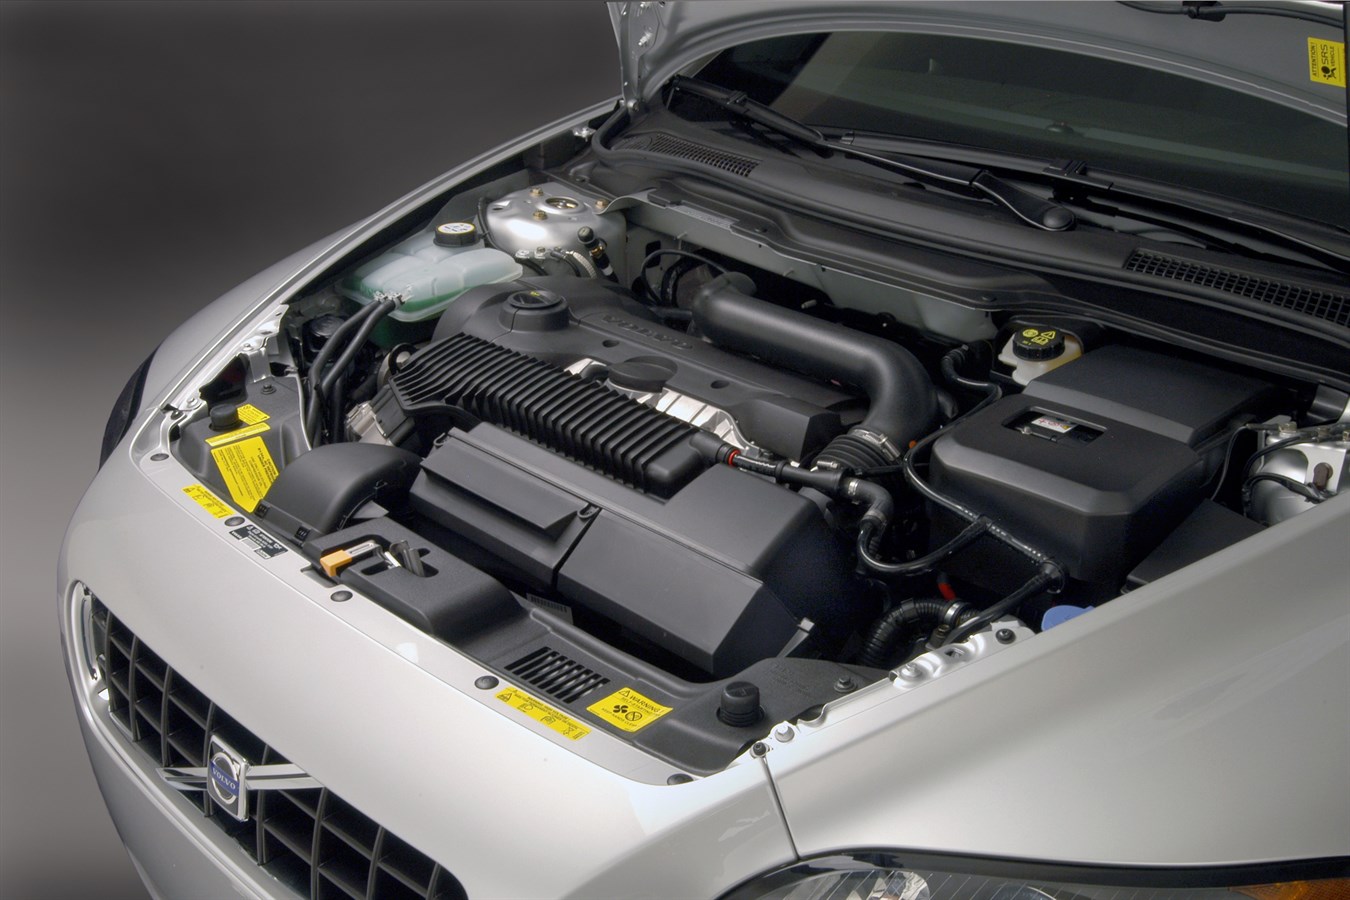 T5 engine in the all-new Volvo C70 engine compartment